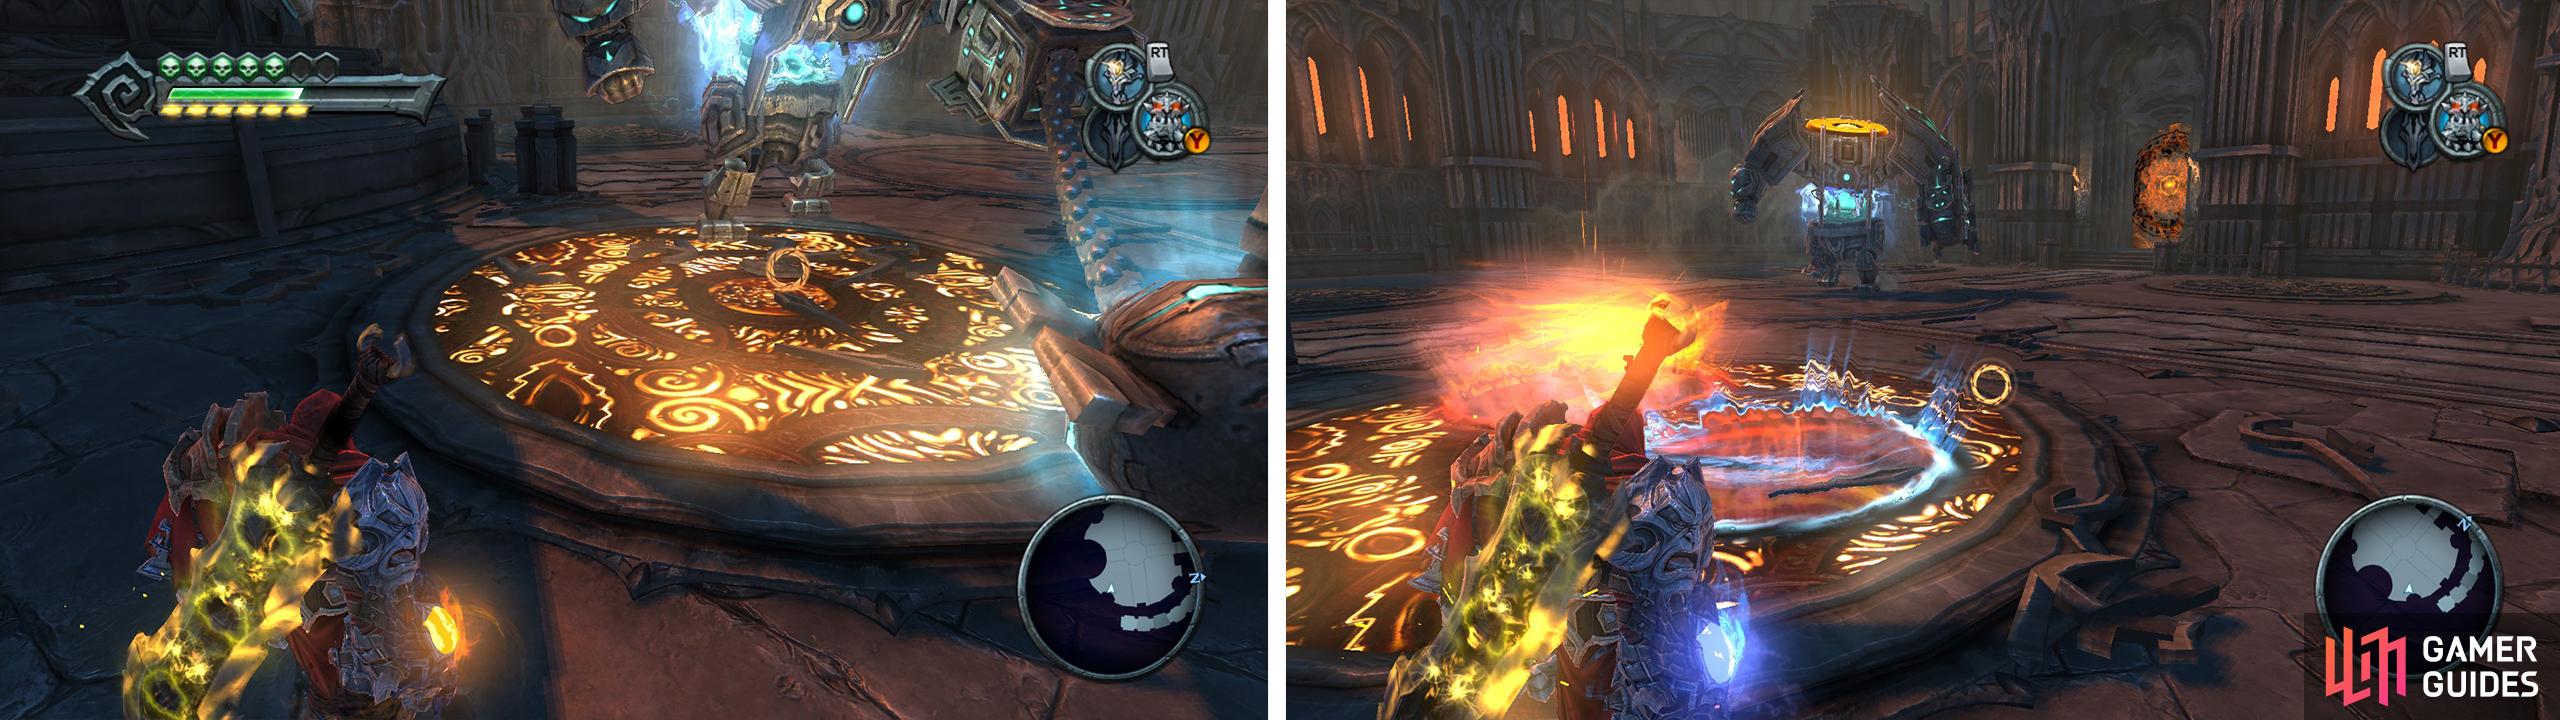 Have the boss destroy the grates covering the portal pads (left) and then use them (right) to launch yourself up to the bosss head again.